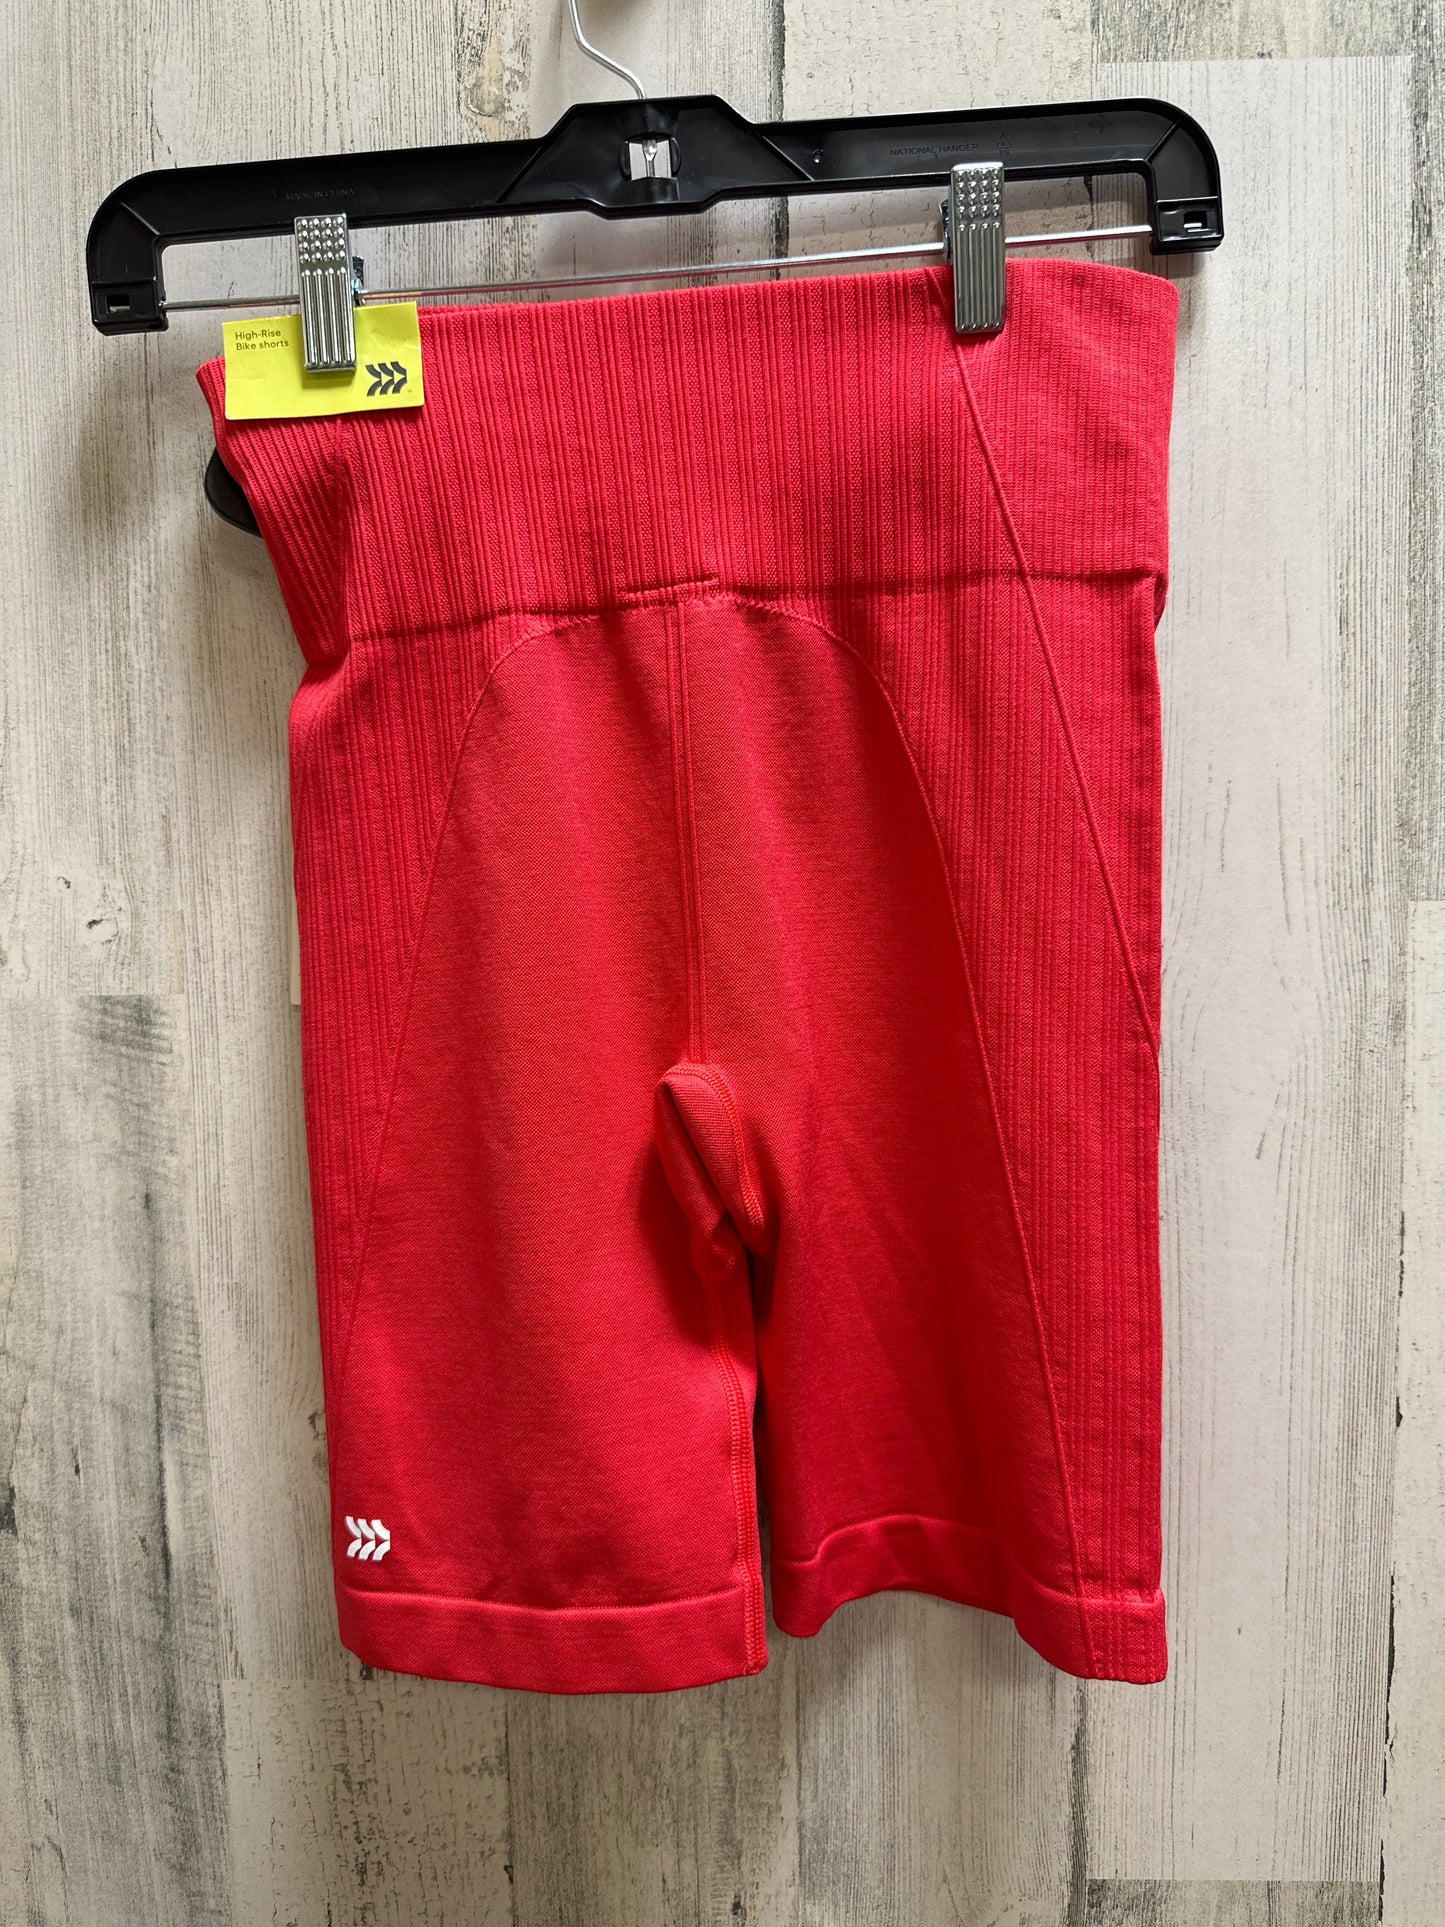 Athletic Shorts By All In Motion  Size: S